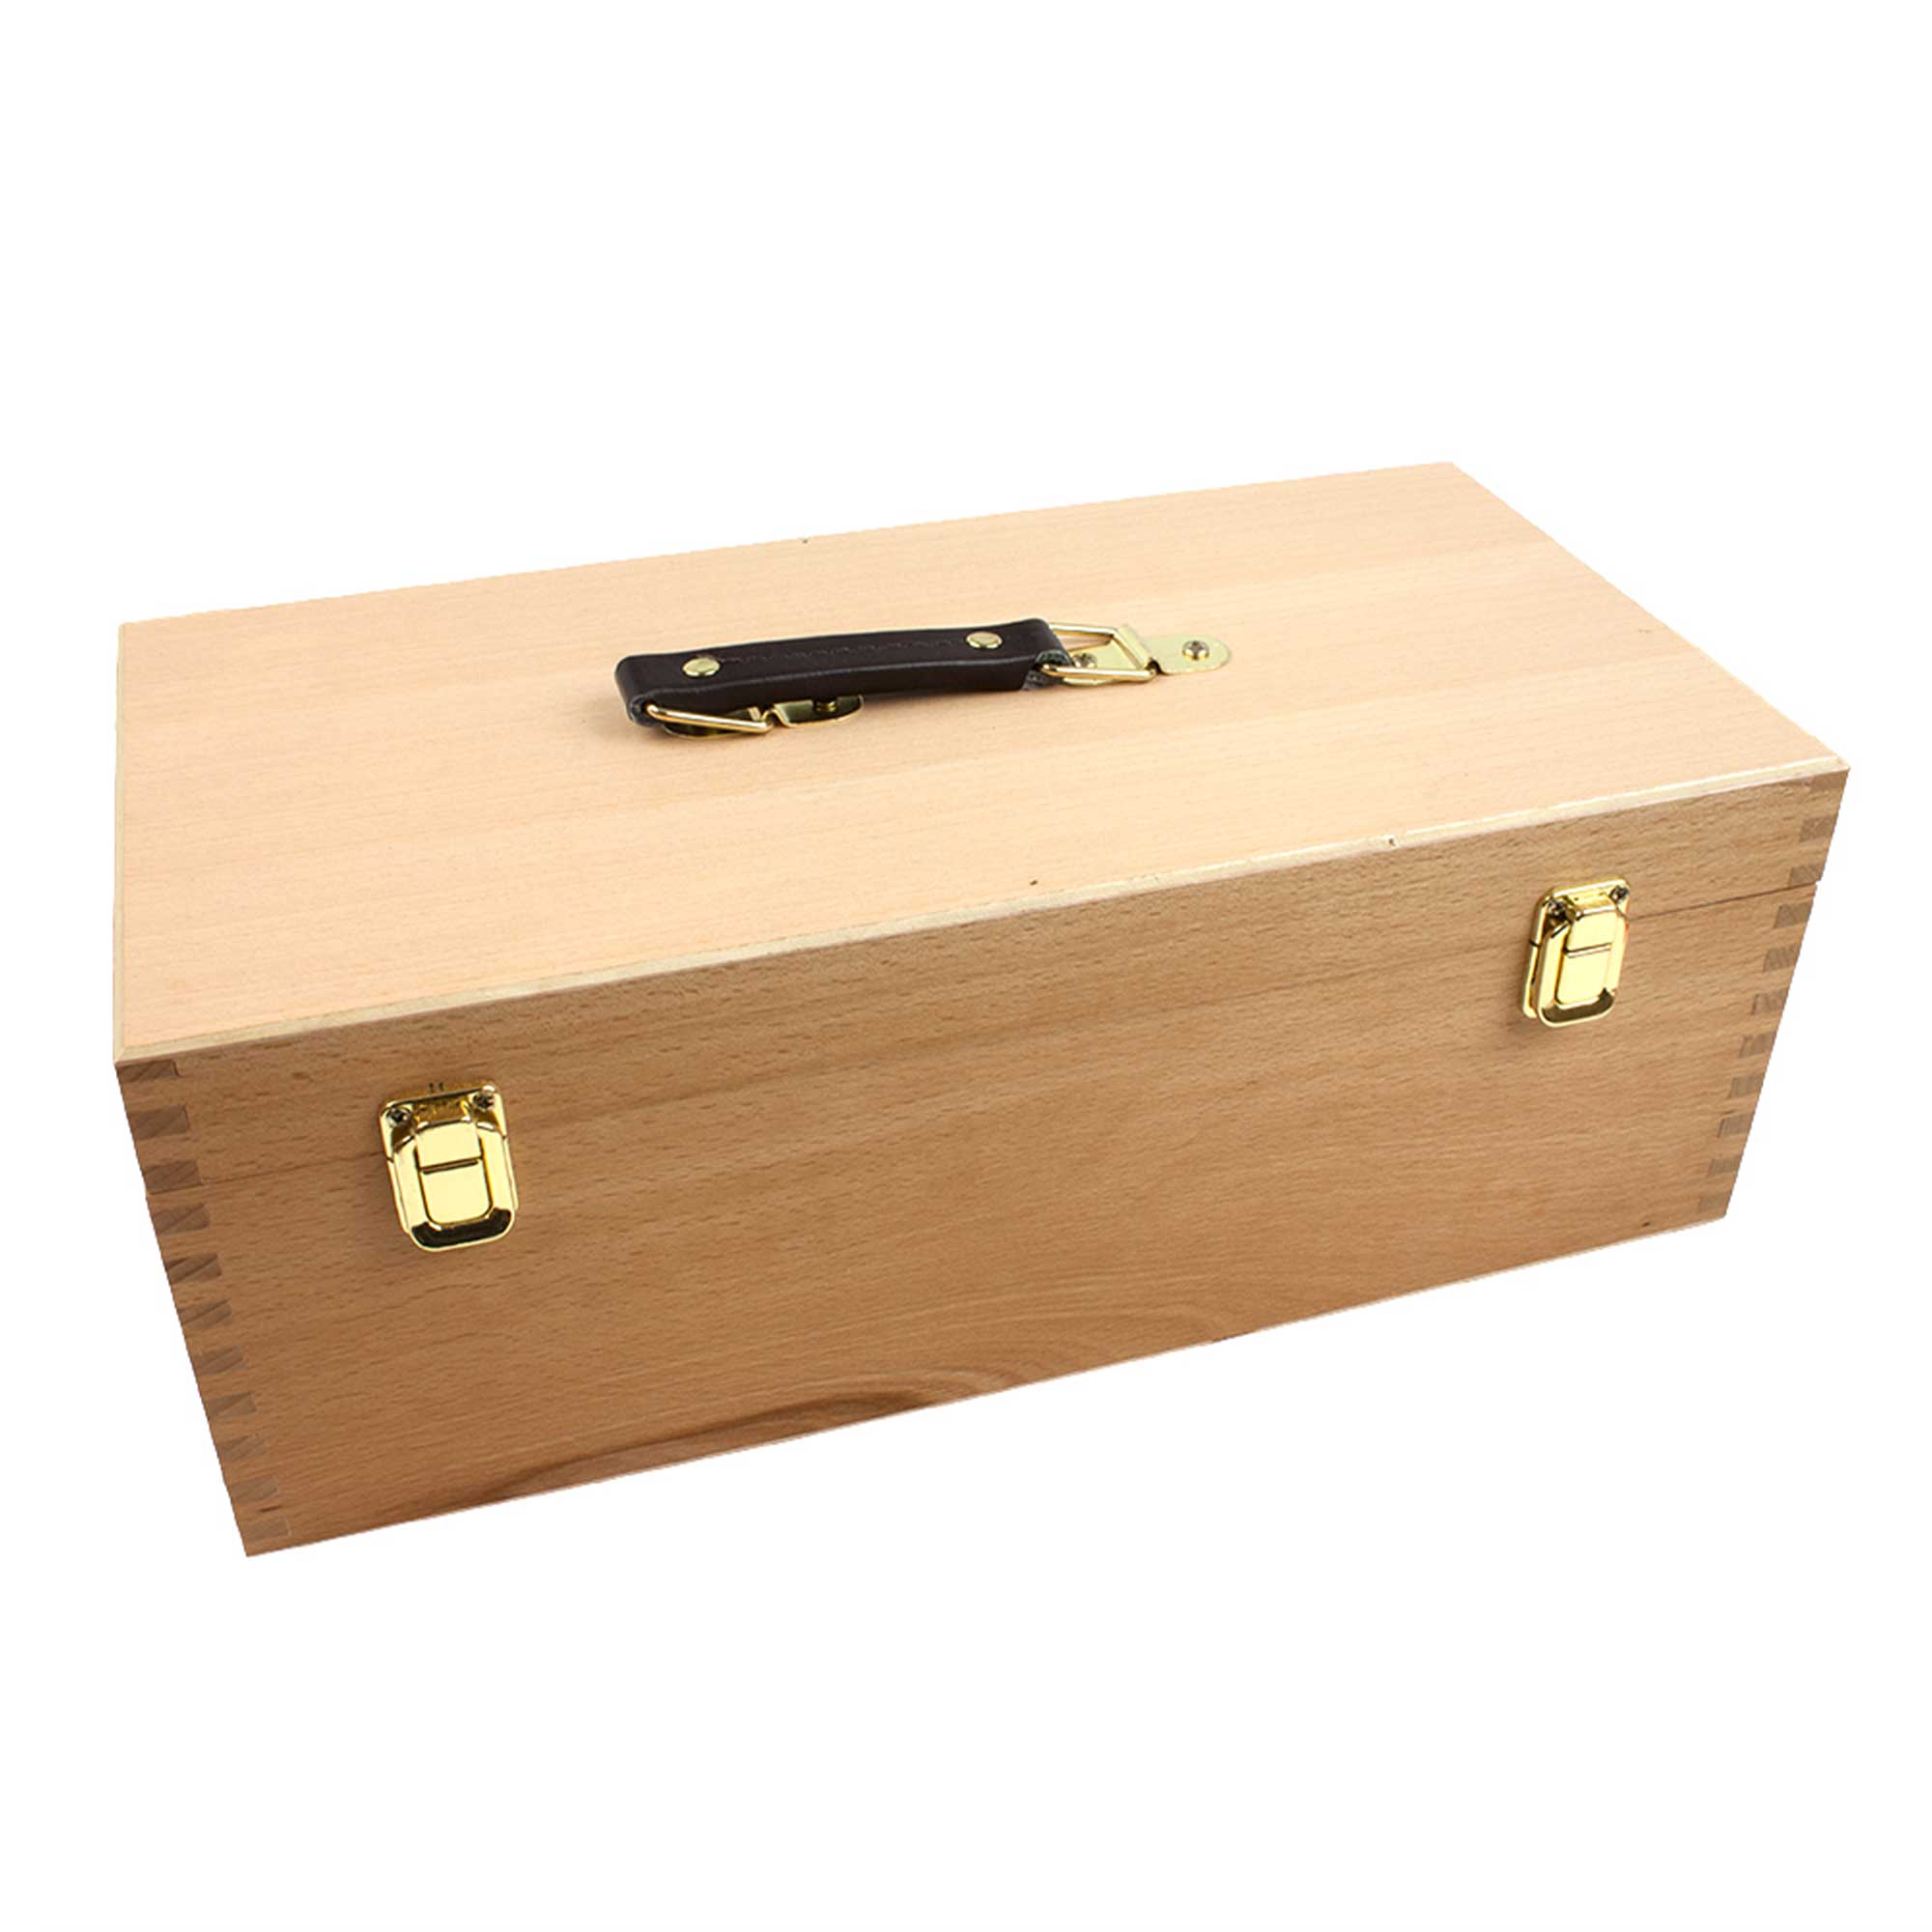 Loxley Howden Artists Storage Chest - Single Box - Closed